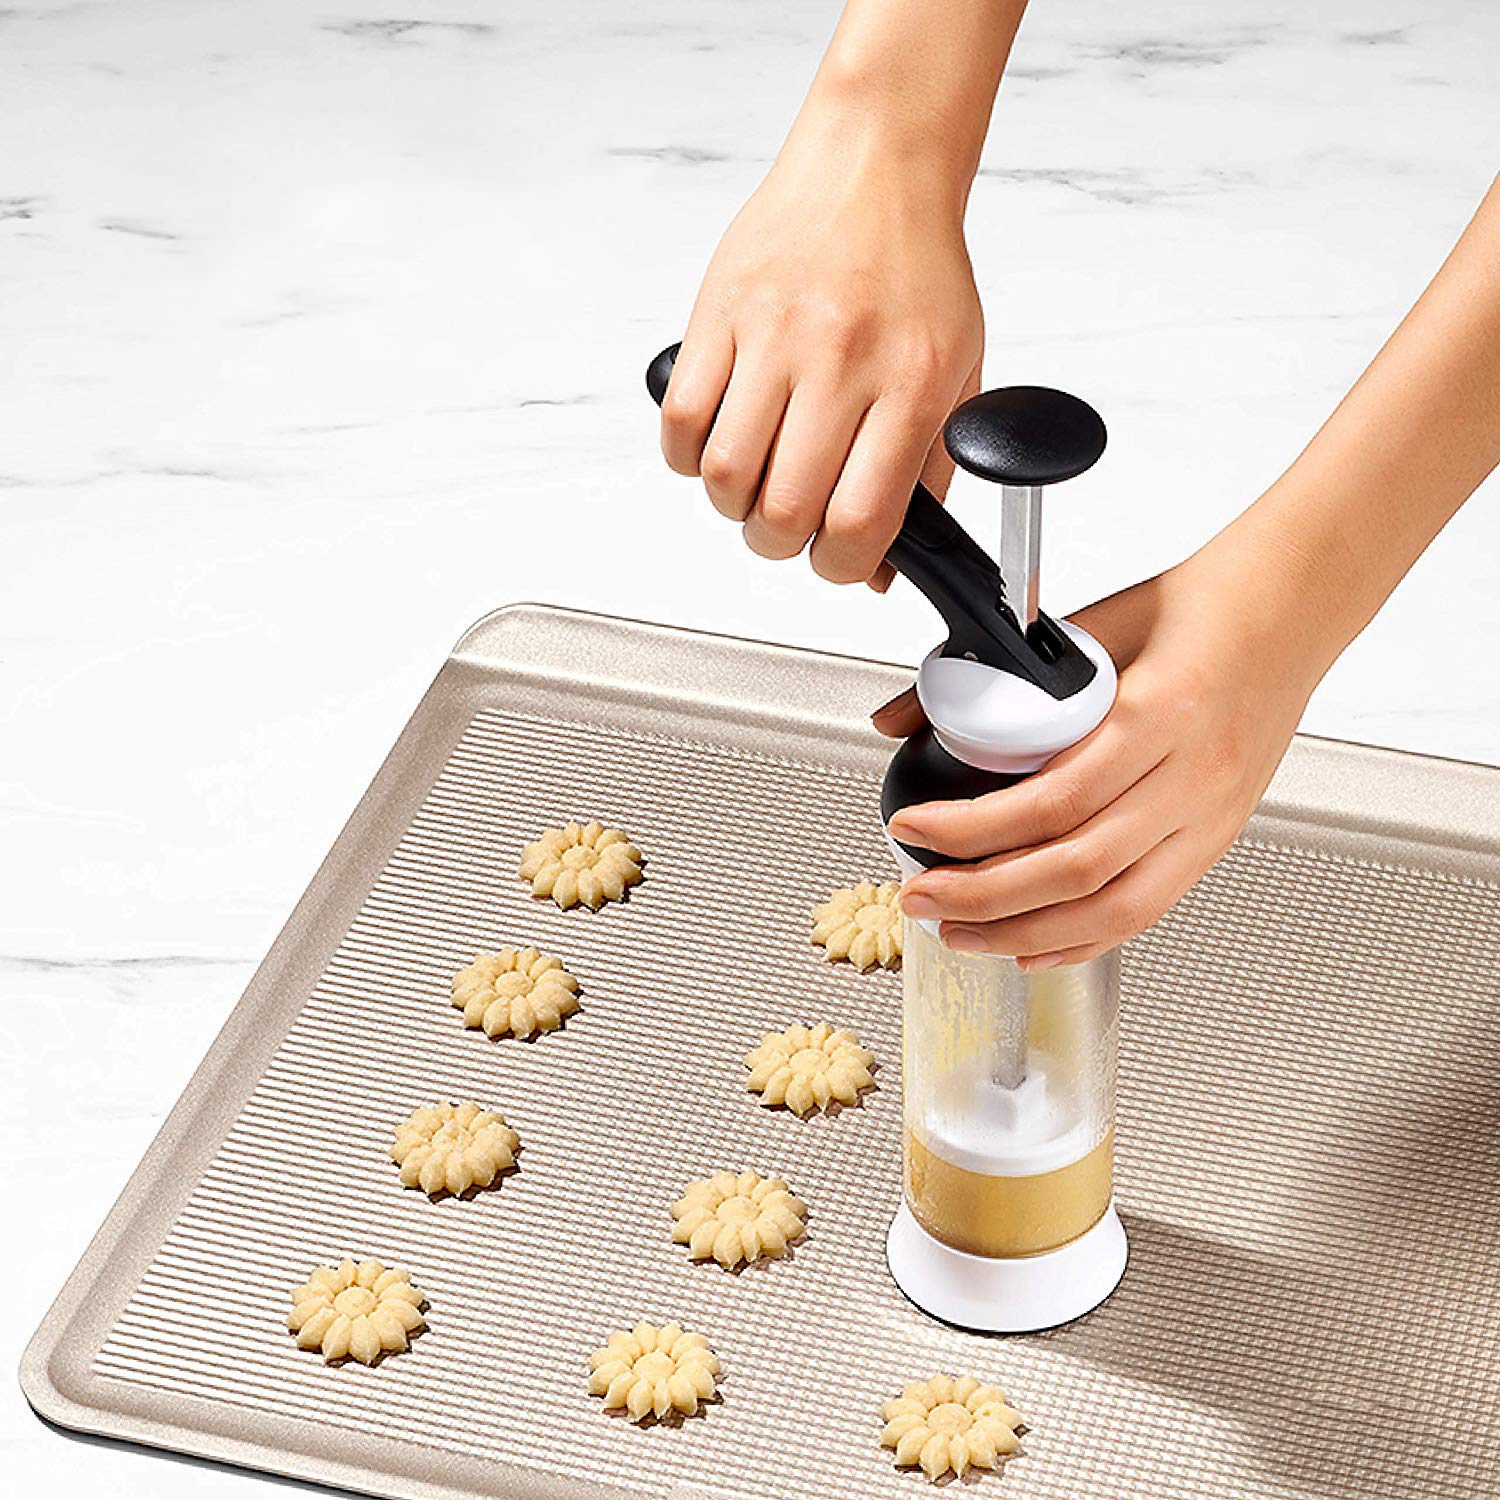 17 Great Gifts for Bakers and Decorators